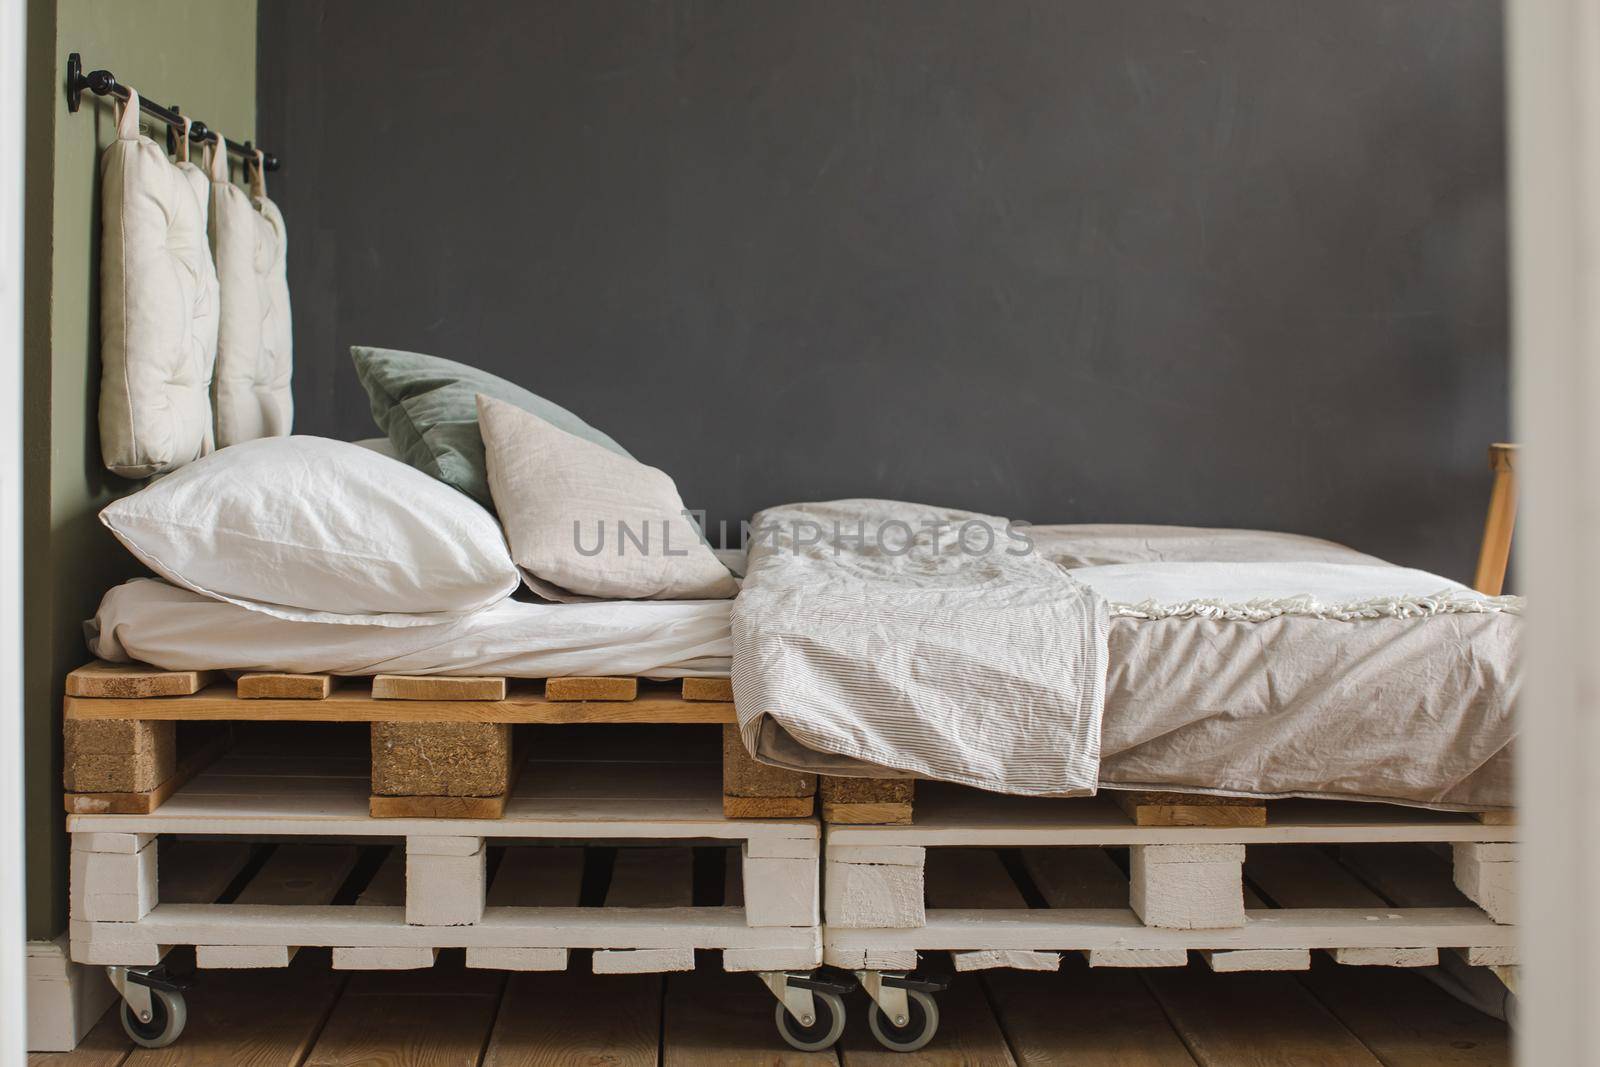 Industrial style bedroom recycled pallet bed frame by Demkat